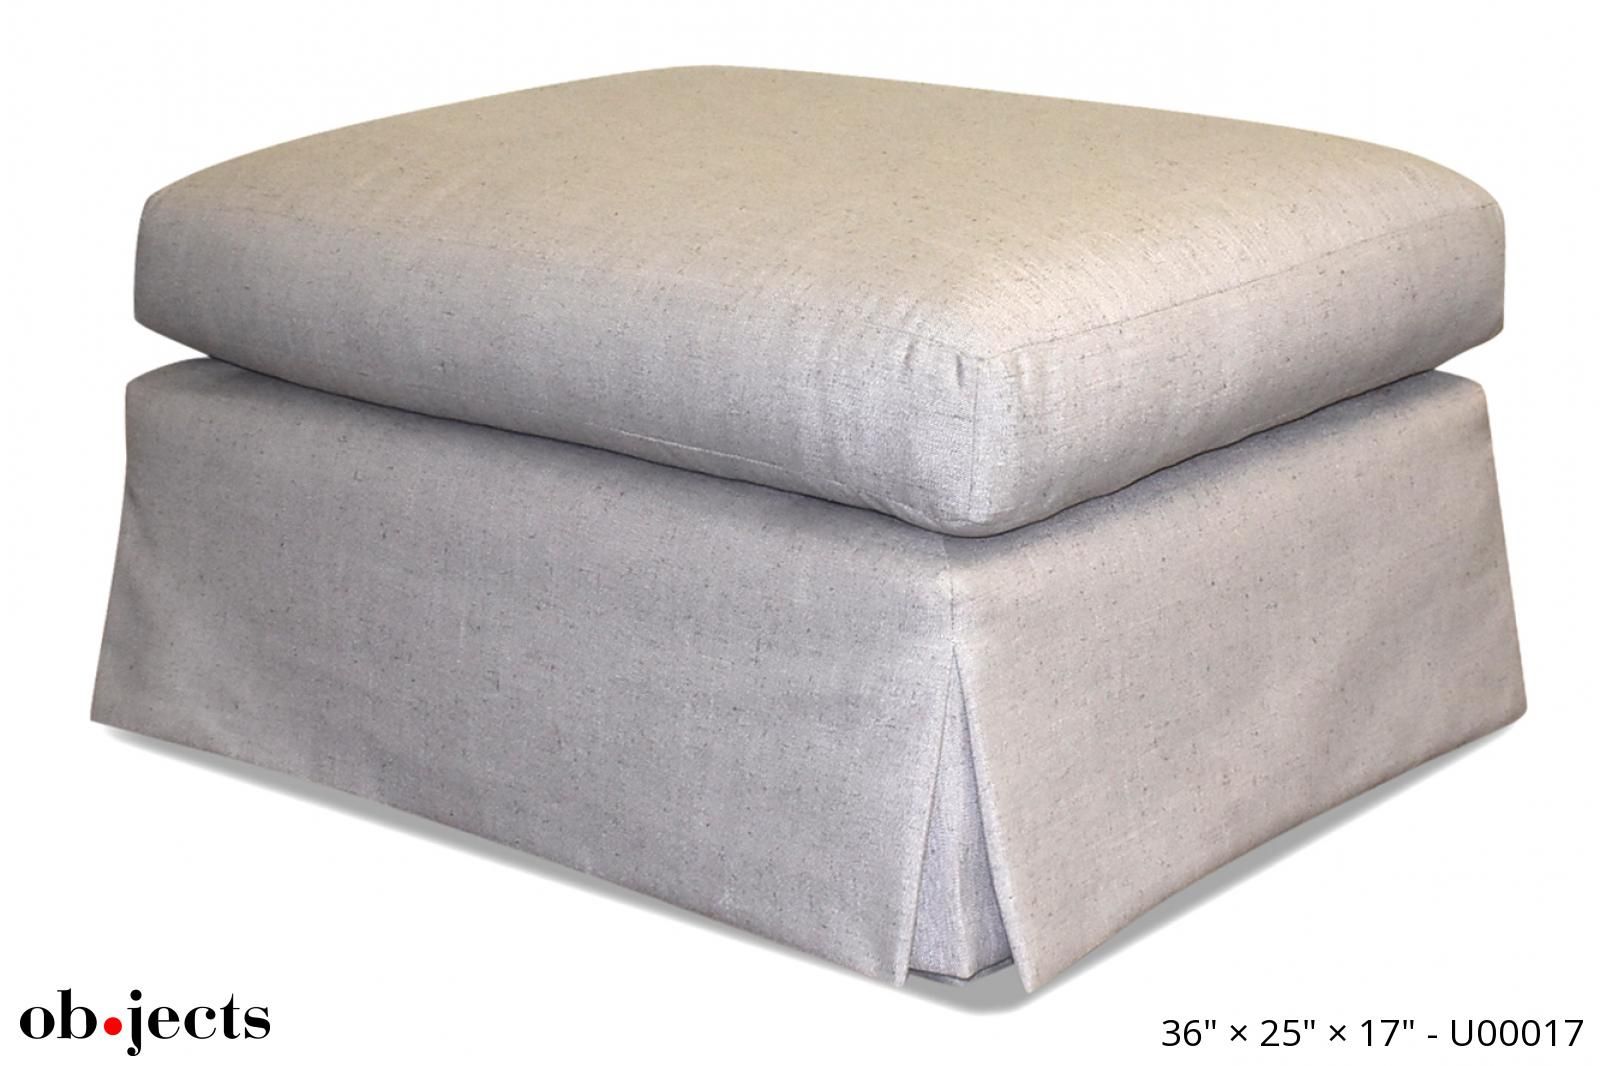 Ottoman Beige Stone Washed Linen | Ob•jects Intended For Neutral Beige Linen Pouf Ottomans (View 13 of 20)